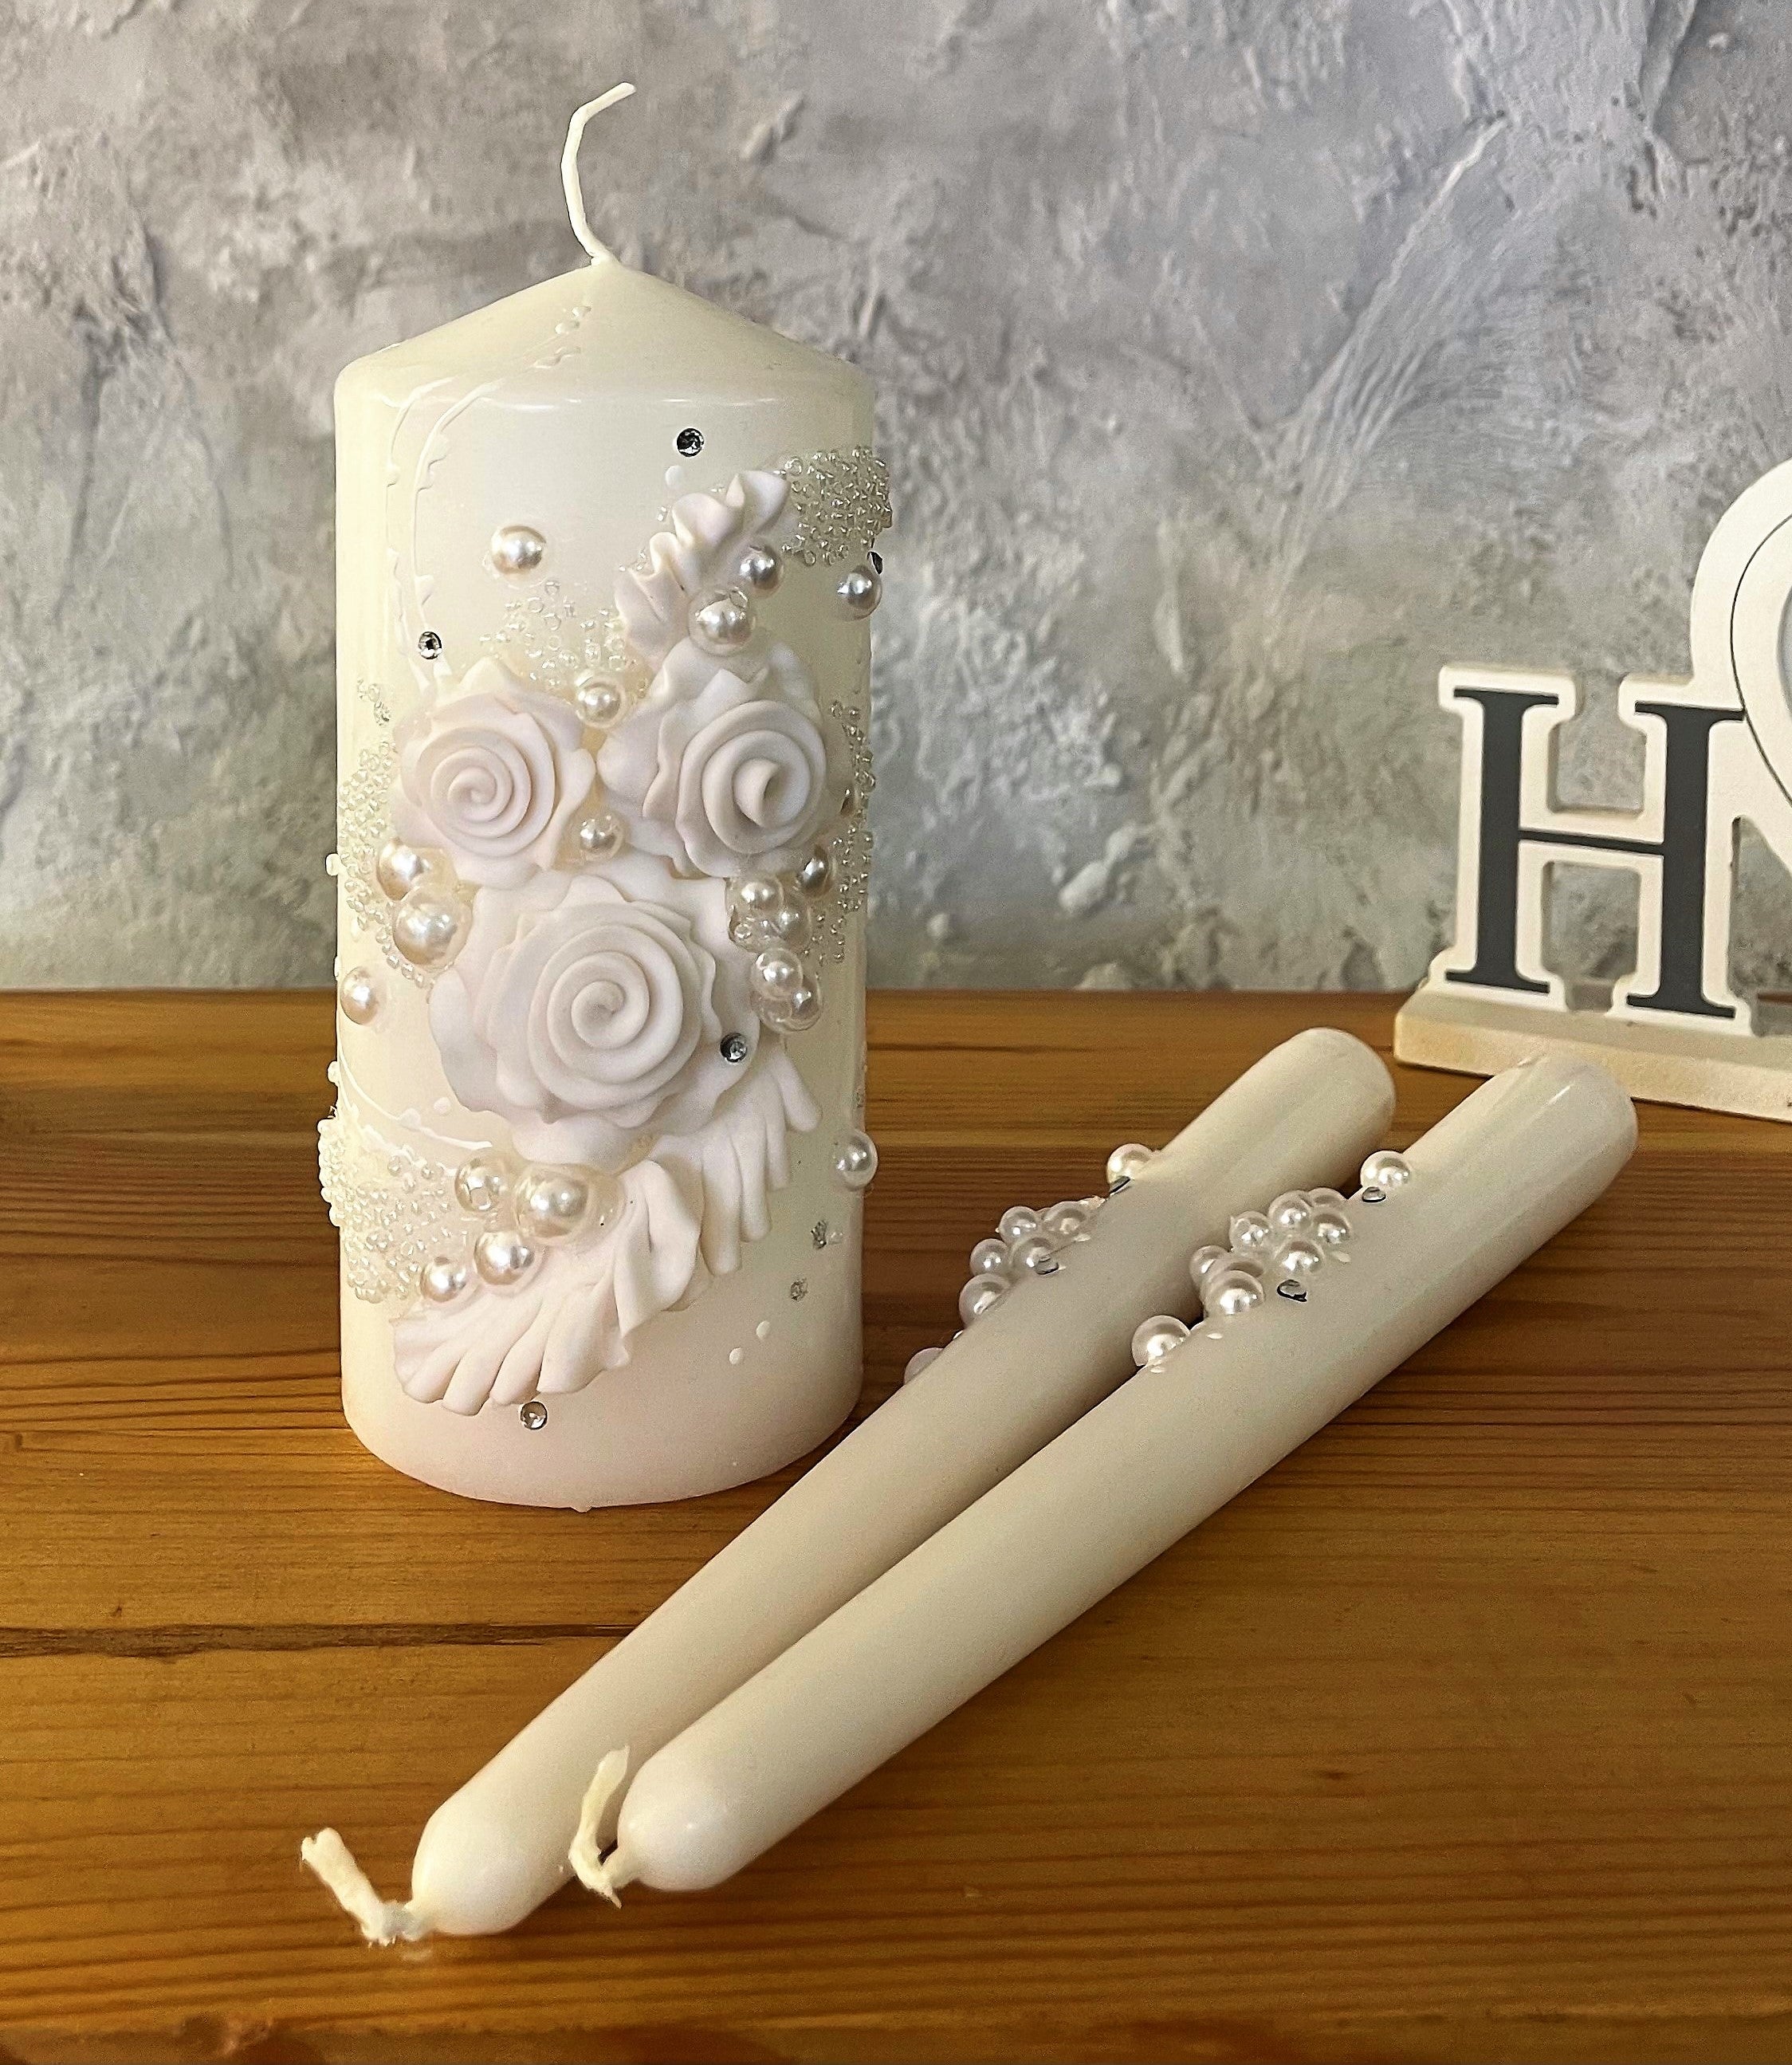 Magik Life Unity Candle Set for Wedding - Wedding Accessories for Reception and Ceremony